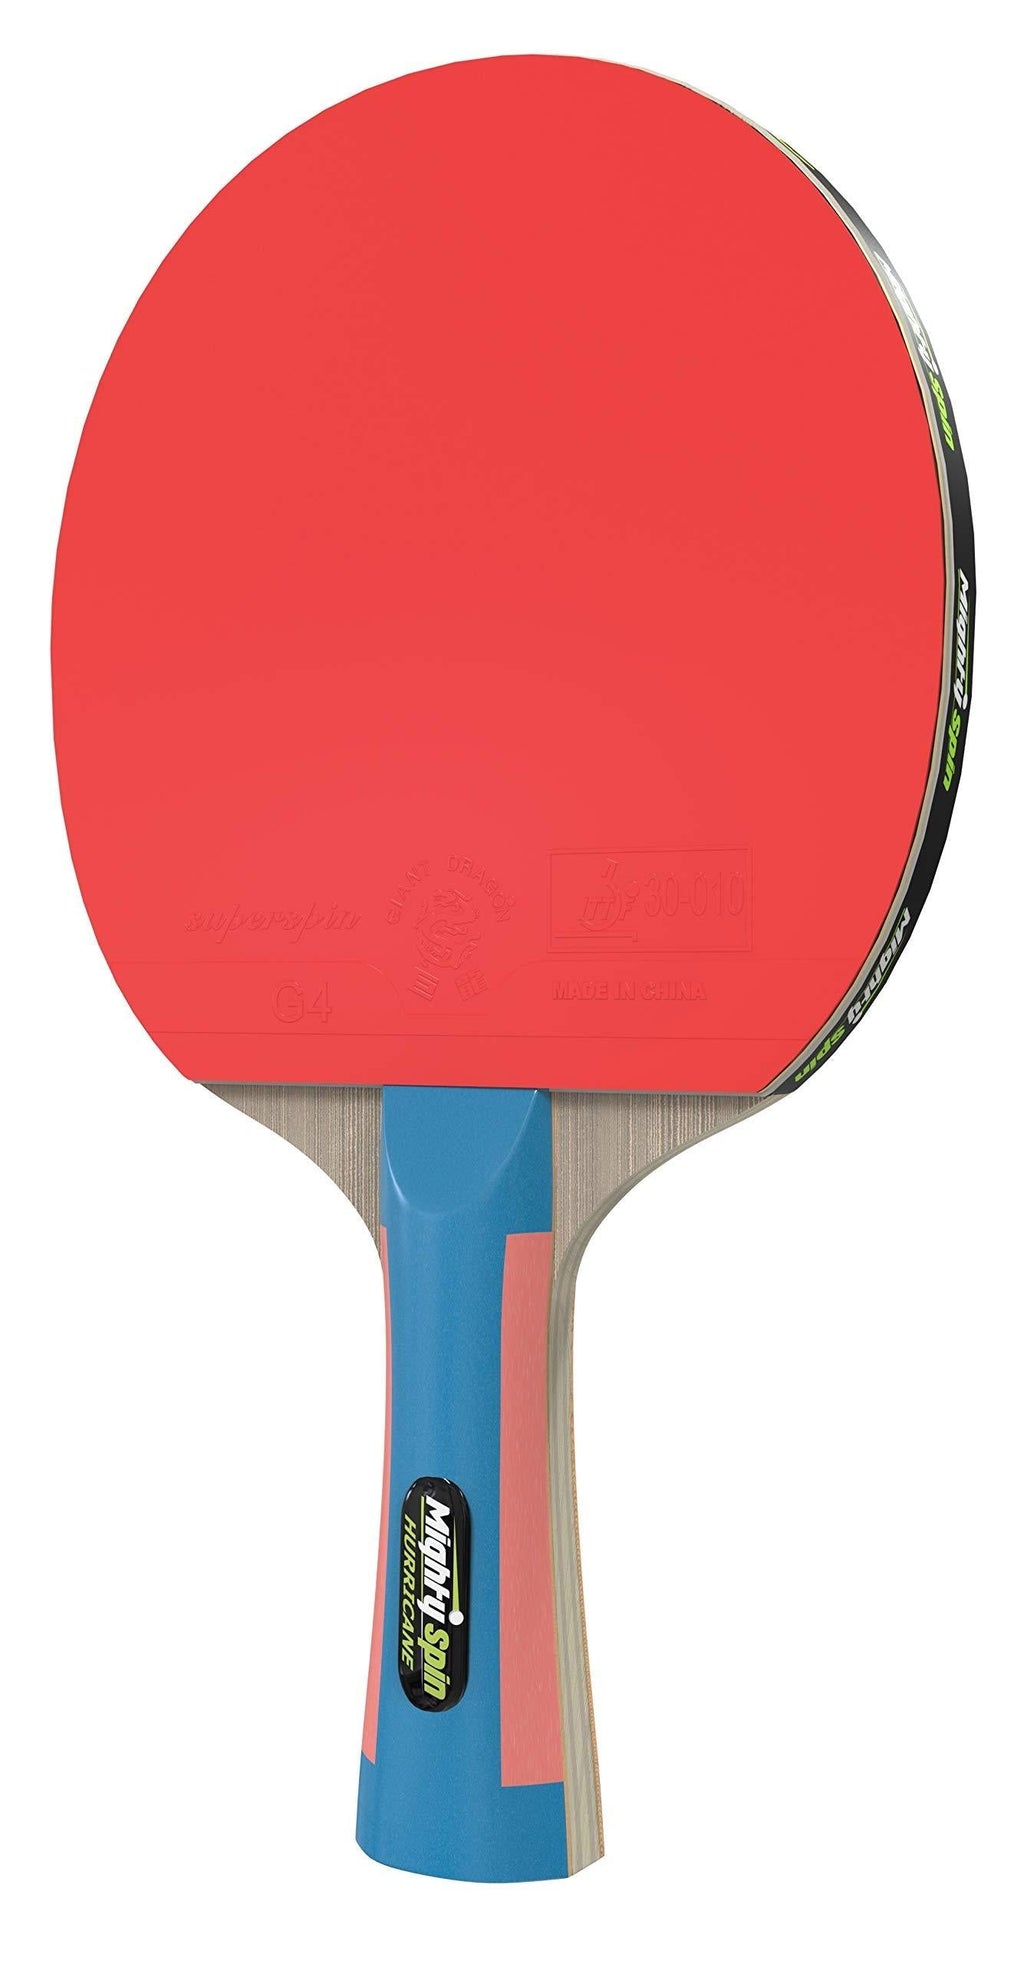 [AUSTRALIA] - MightySpin Hurricane Table Tennis Paddle Ping Pong Paddle w/ 2.0mm ITTF Approved Rubber - Improve Your Serves, Get Serious Spin and Level-Up Your Skills - Ping Pong Paddles 